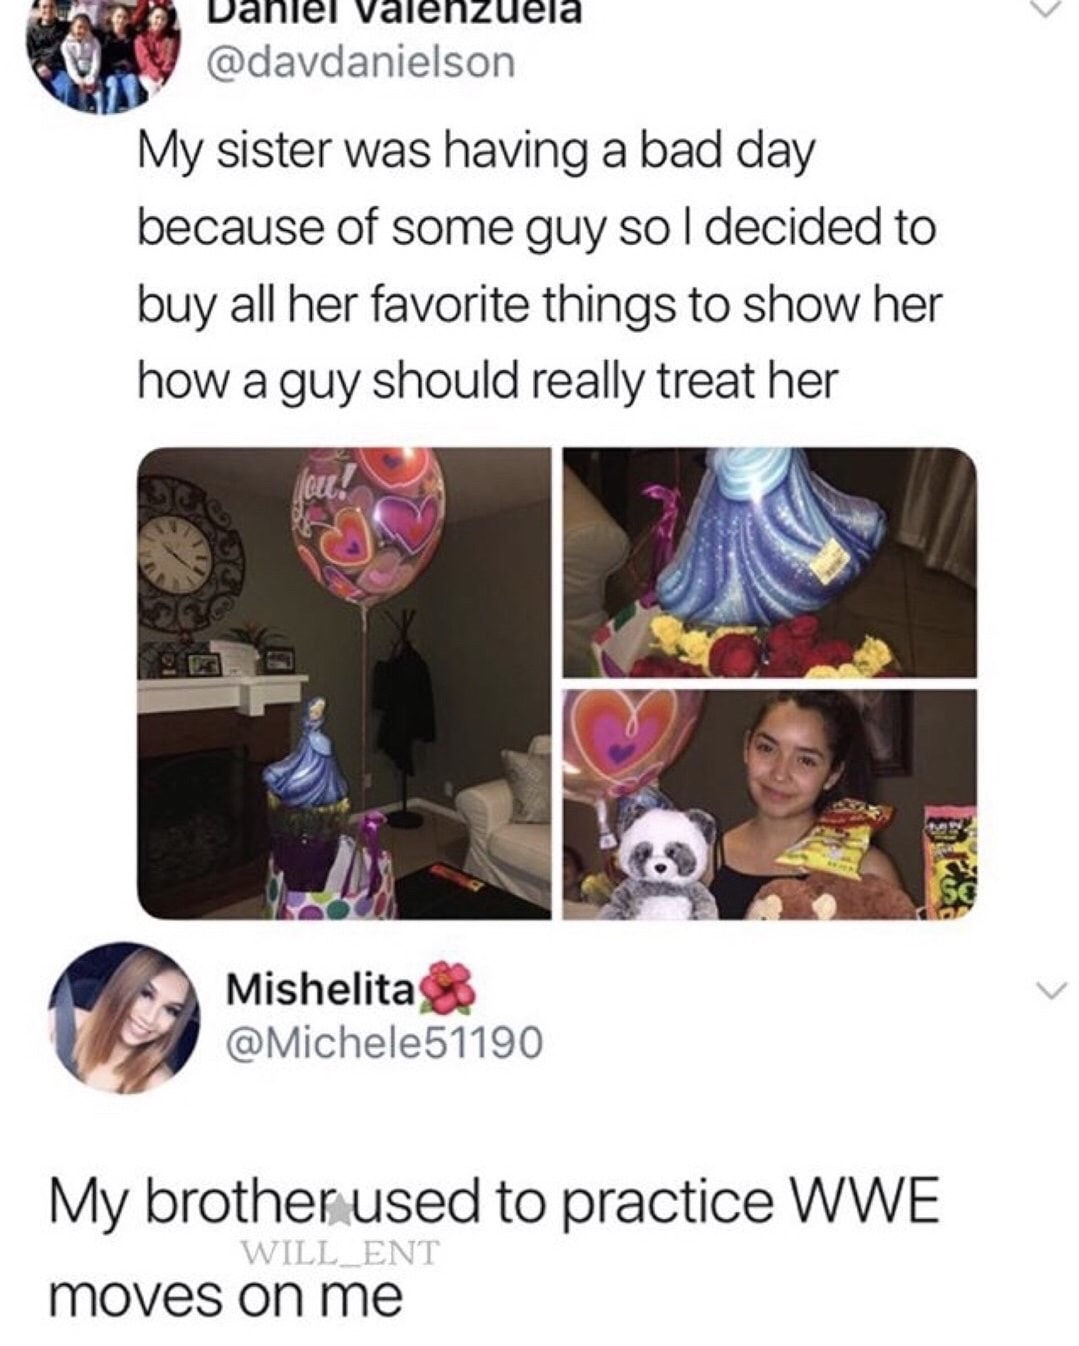 having a sister meme - Daniel Valenzuela My sister was having a bad day because of some guy so I decided to buy all her favorite things to show her how a guy should really treat her Mishelita My brother used to practice Wwe moves on me WILL_ENT